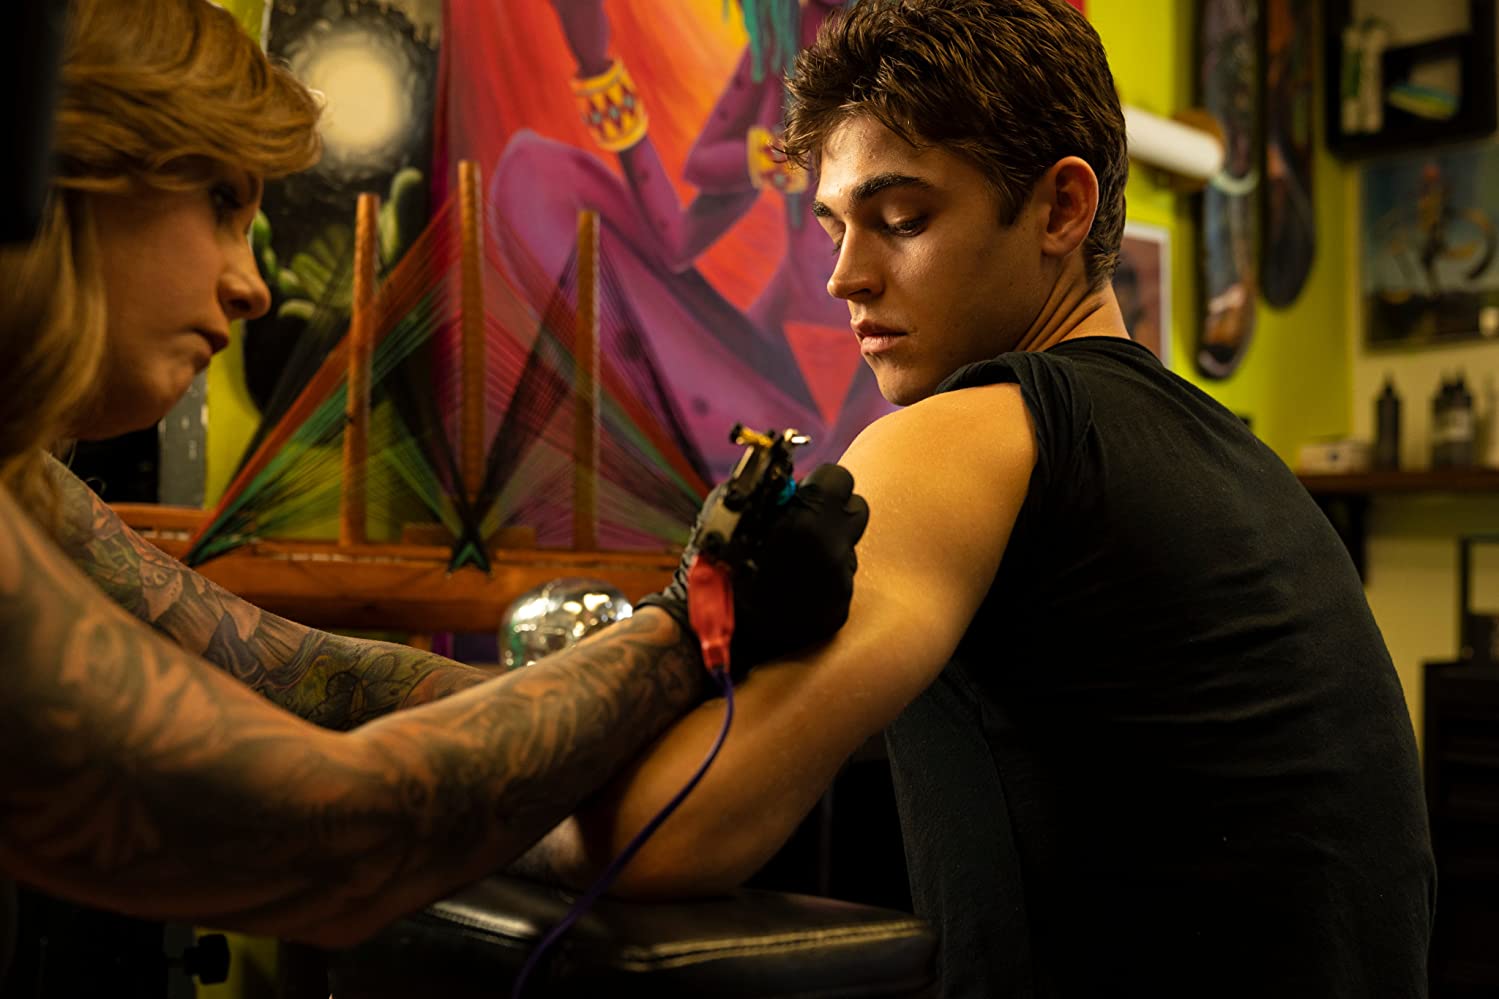 Hero Fiennes-Tiffin gets tatted up in “After We Collided”. (Credit: Open Road Films)